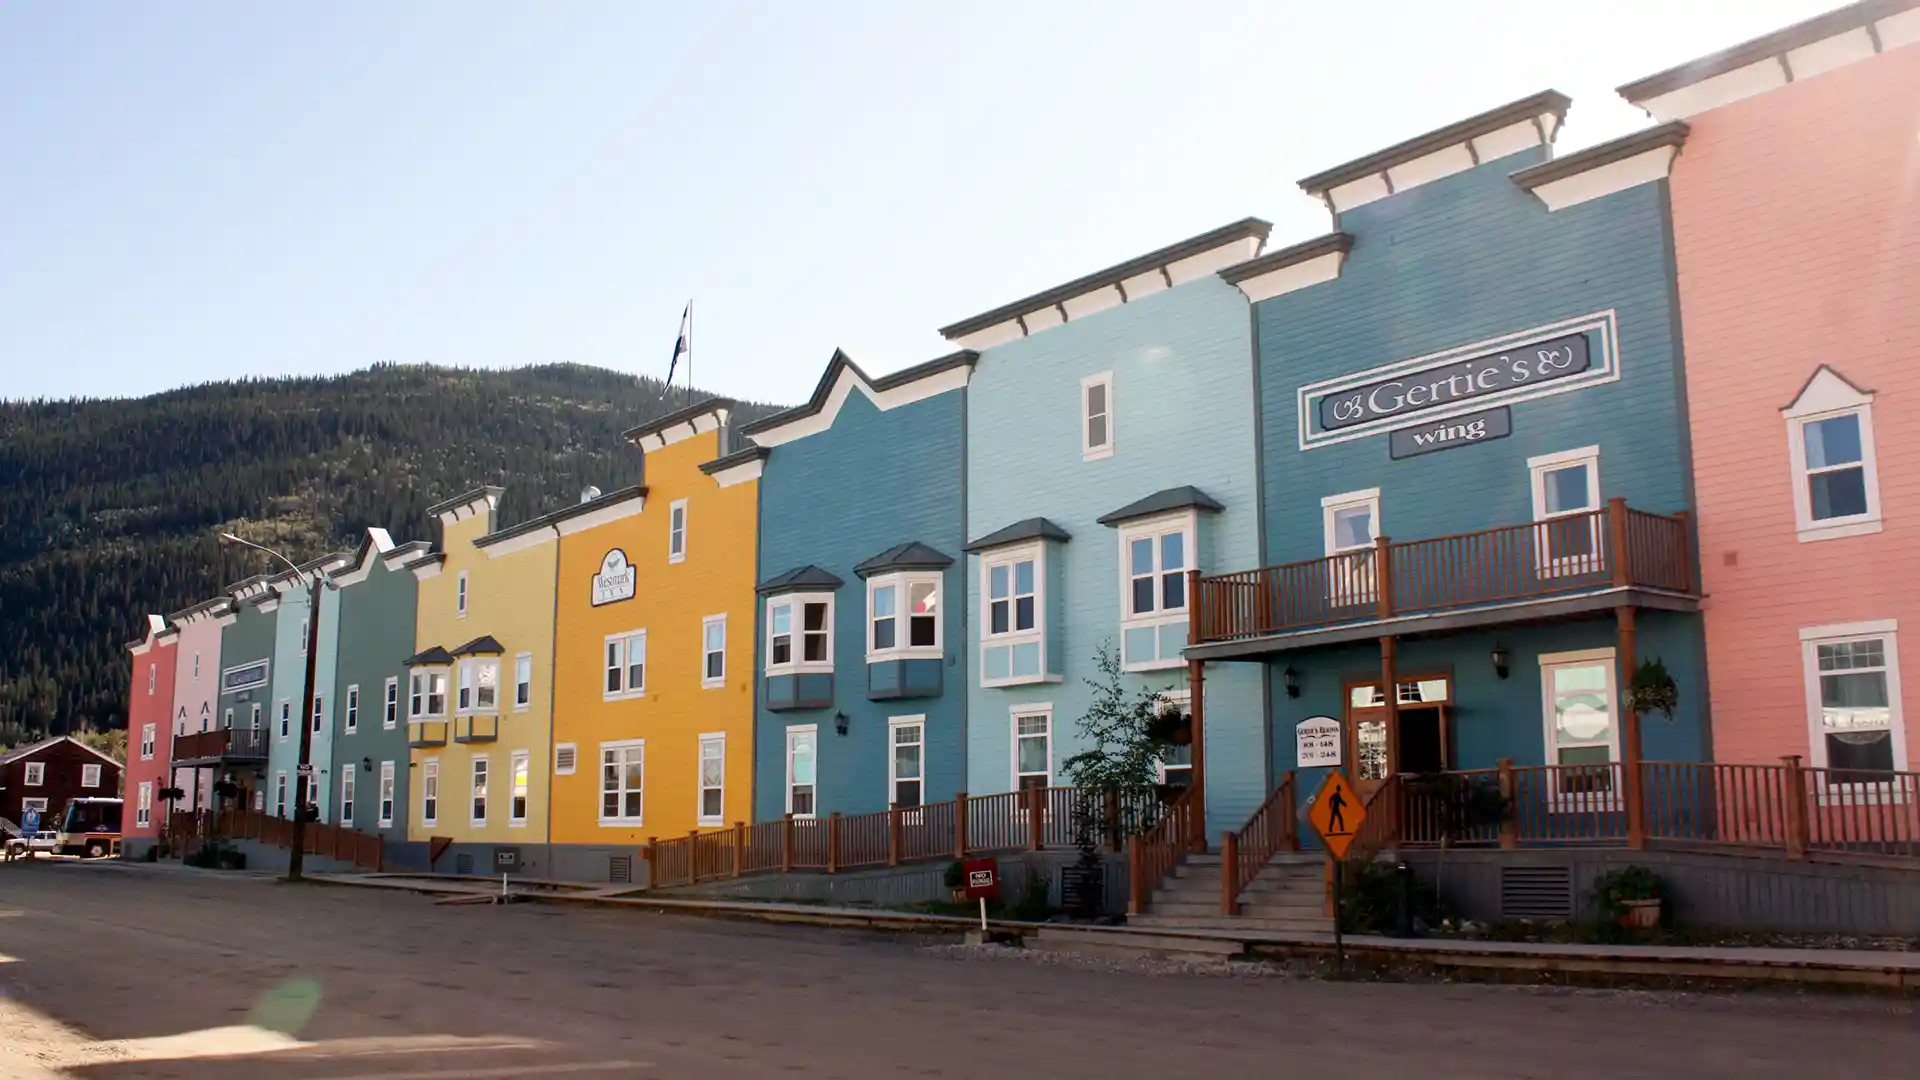 View of yellow, blue and pink-colored buildings on a street in small town.